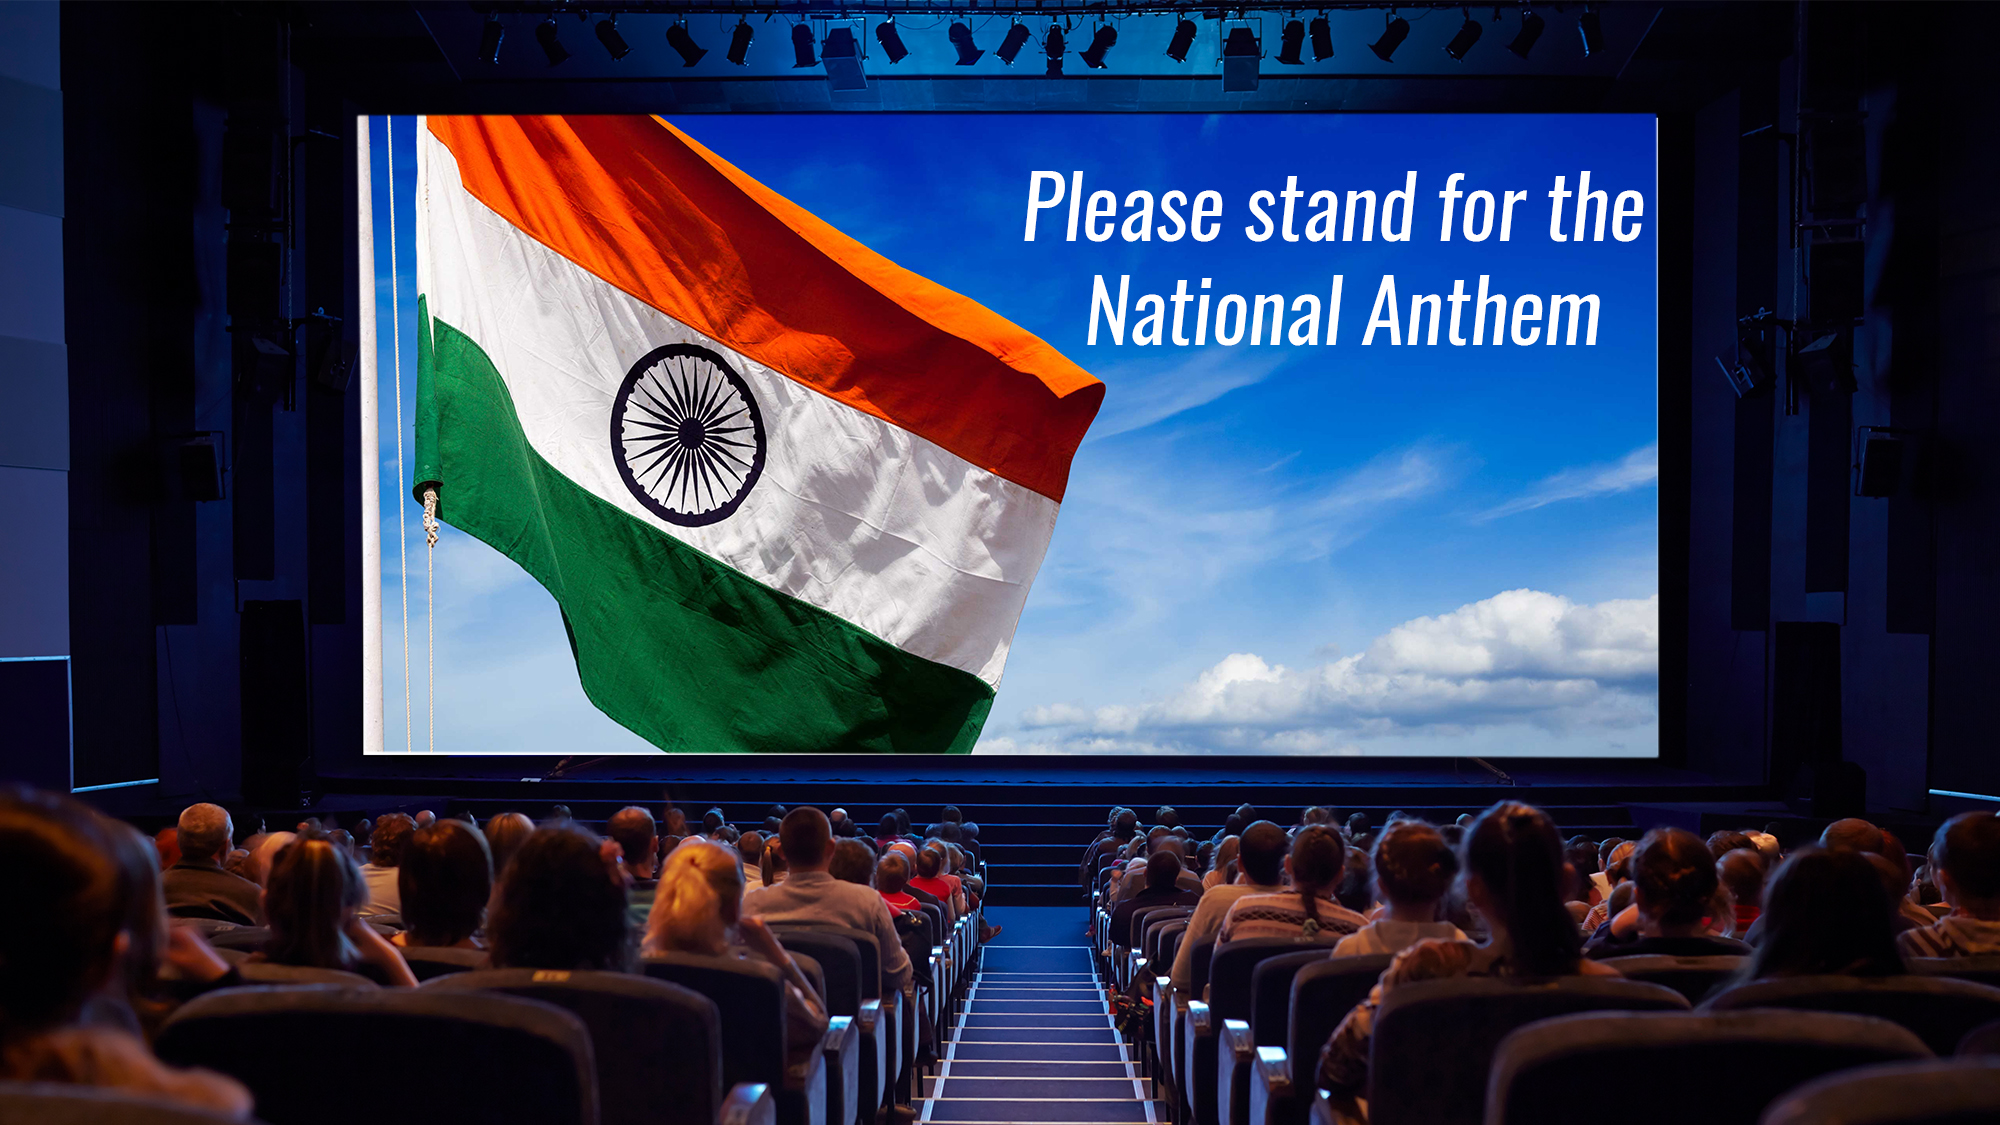 To prove patriotism, it is not necessary for cinemas to stand at national anthem